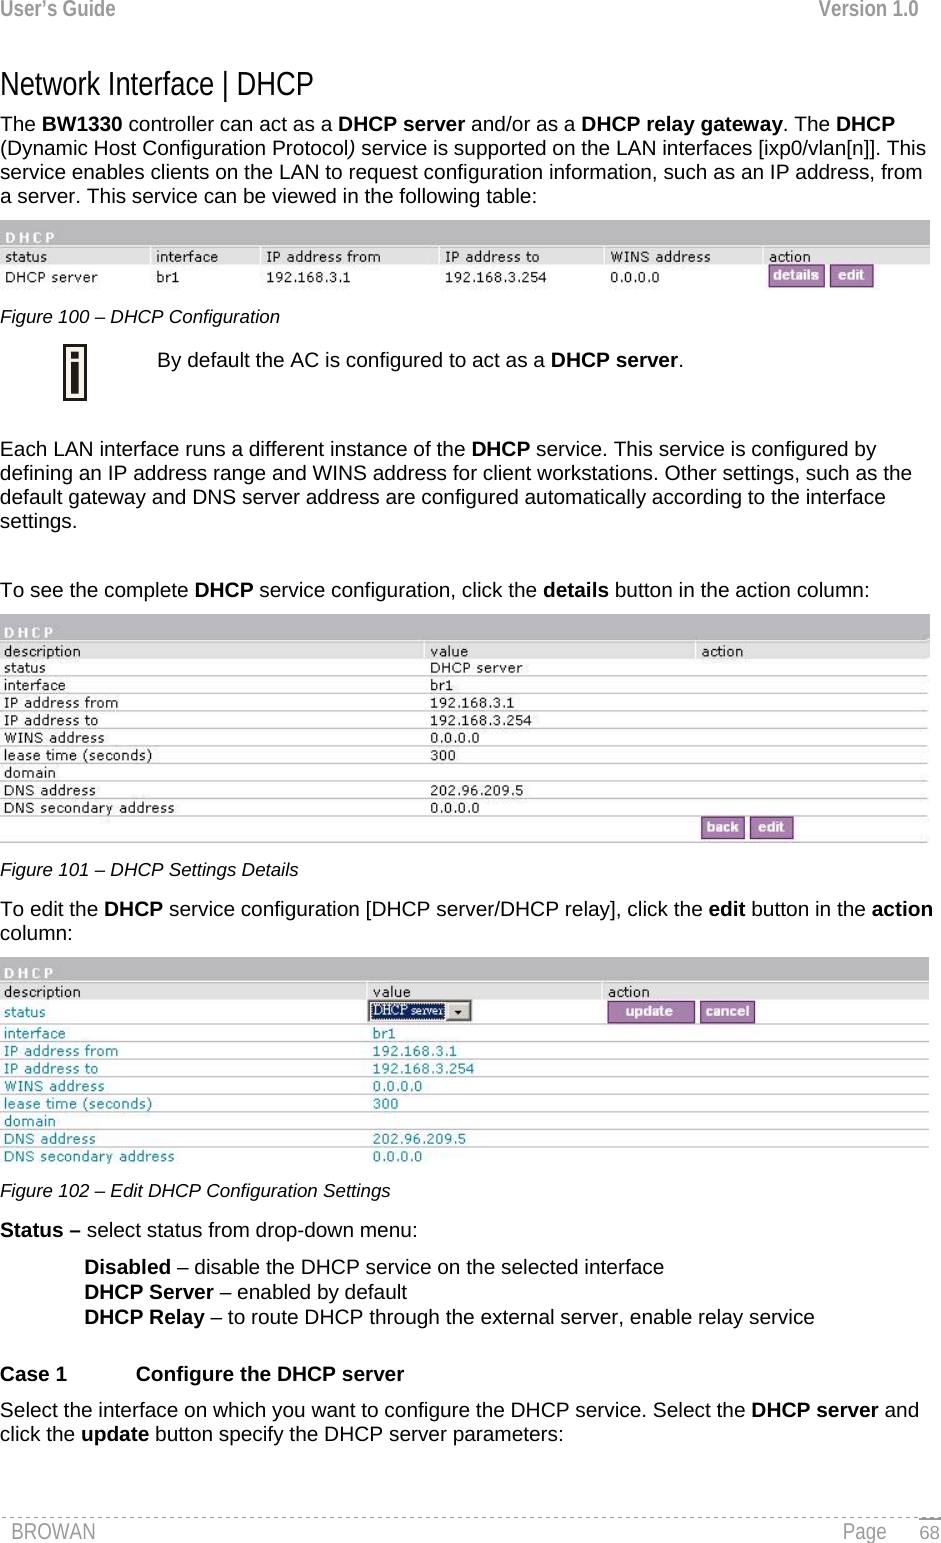 User’s Guide  Version 1.0  Network Interface | DHCP  The BW1330 controller can act as a DHCP server and/or as a DHCP relay gateway. The DHCP (Dynamic Host Configuration Protocol) service is supported on the LAN interfaces [ixp0/vlan[n]]. This service enables clients on the LAN to request configuration information, such as an IP address, from a server. This service can be viewed in the following table:  Figure 100 – DHCP Configuration  By default the AC is configured to act as a DHCP server.  Each LAN interface runs a different instance of the DHCP service. This service is configured by defining an IP address range and WINS address for client workstations. Other settings, such as the default gateway and DNS server address are configured automatically according to the interface settings.  To see the complete DHCP service configuration, click the details button in the action column:  Figure 101 – DHCP Settings Details To edit the DHCP service configuration [DHCP server/DHCP relay], click the edit button in the action column:  Figure 102 – Edit DHCP Configuration Settings Status – select status from drop-down menu: Disabled – disable the DHCP service on the selected interface DHCP Server – enabled by default DHCP Relay – to route DHCP through the external server, enable relay service  Case 1  Configure the DHCP server  Select the interface on which you want to configure the DHCP service. Select the DHCP server and click the update button specify the DHCP server parameters: BROWAN                                                                                                                                               Page   68